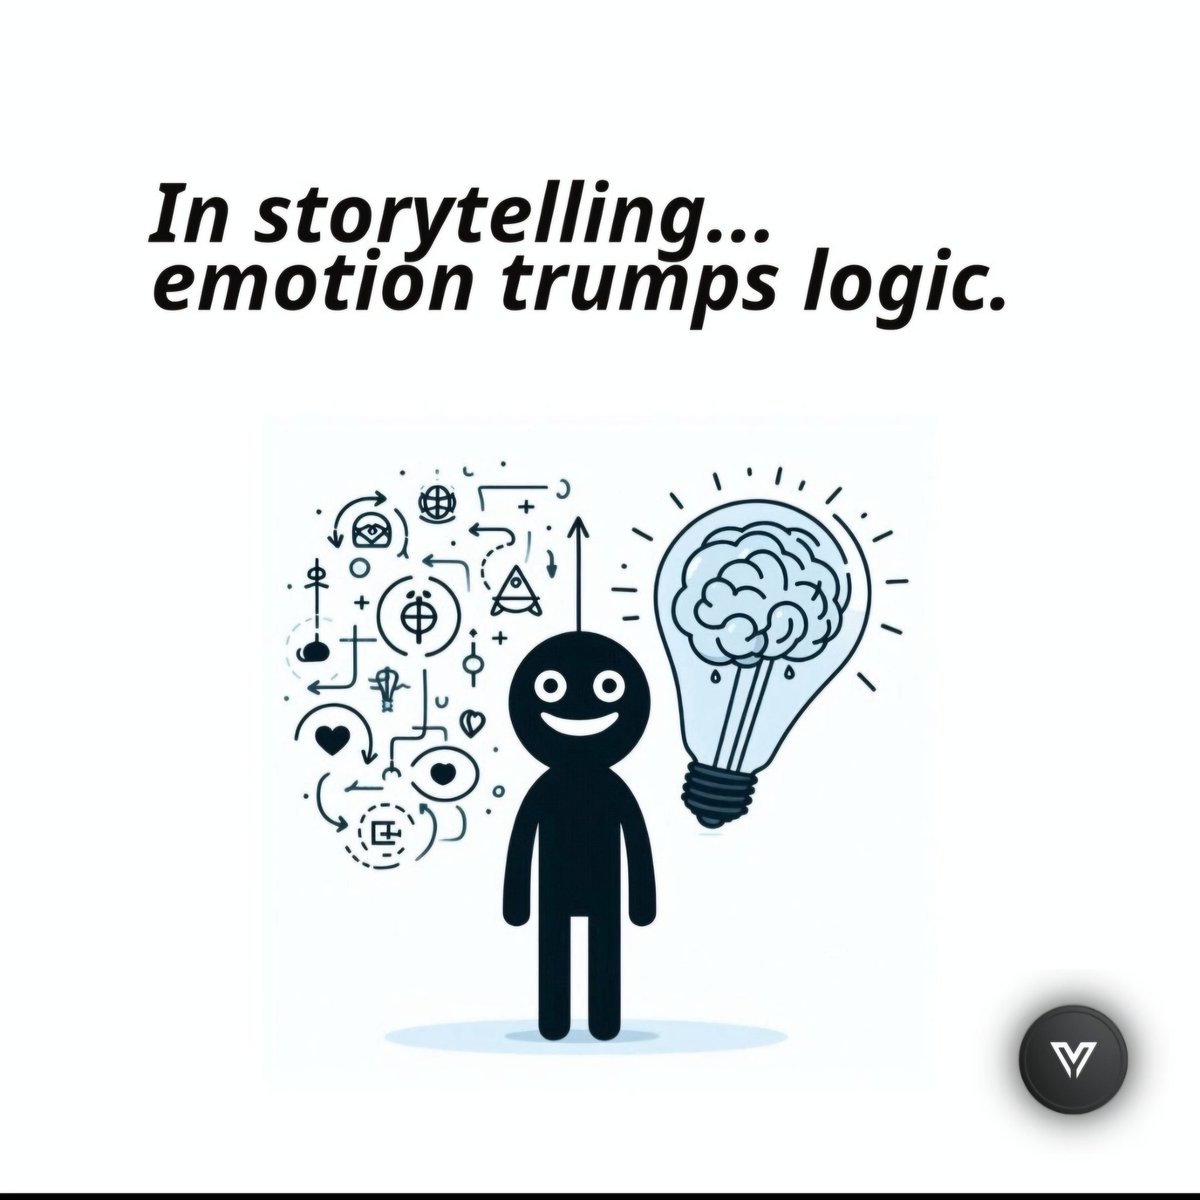 🌈 **Your Turn**: What say you? When crafting tales, do you lean toward logic's sturdy scaffolding or emotion's wild winds? Share your thoughts! 📝👇 #storytelling #screenplay #writingsociety #writingtips